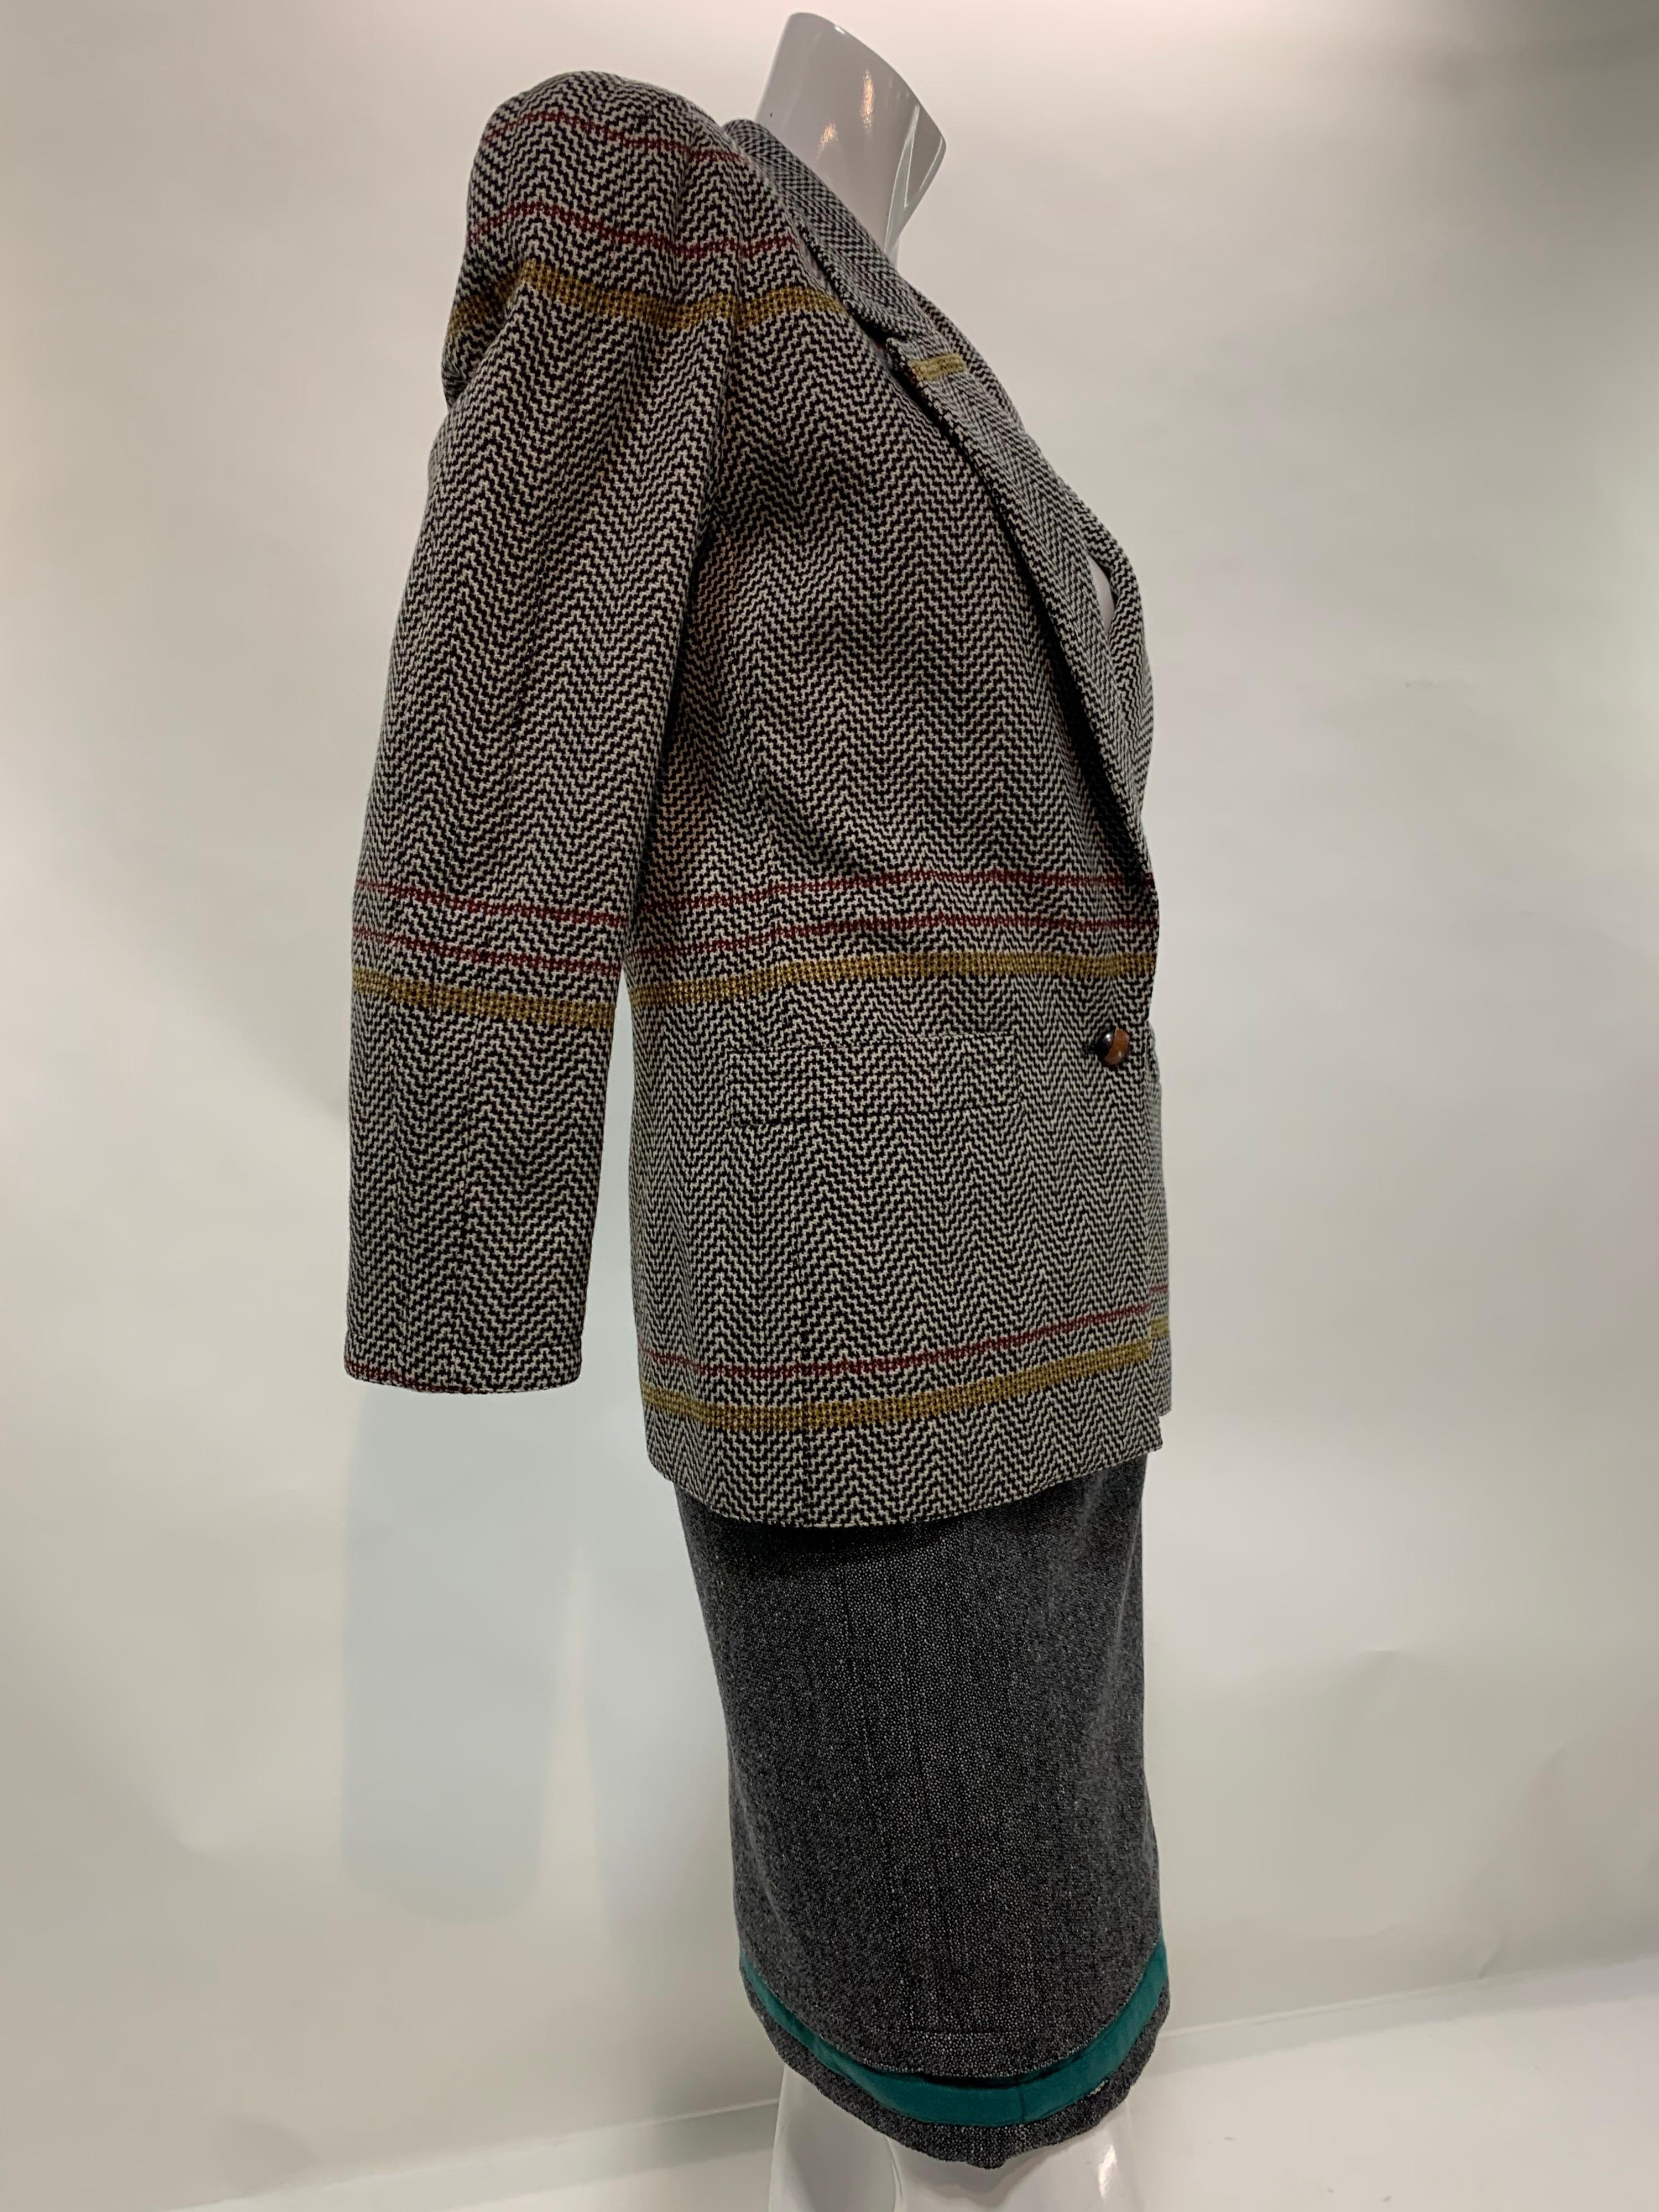 1980 Gianni Versace Mixed Tweed Skirt Suit w/ Structured Shoulder Silhouette For Sale 2